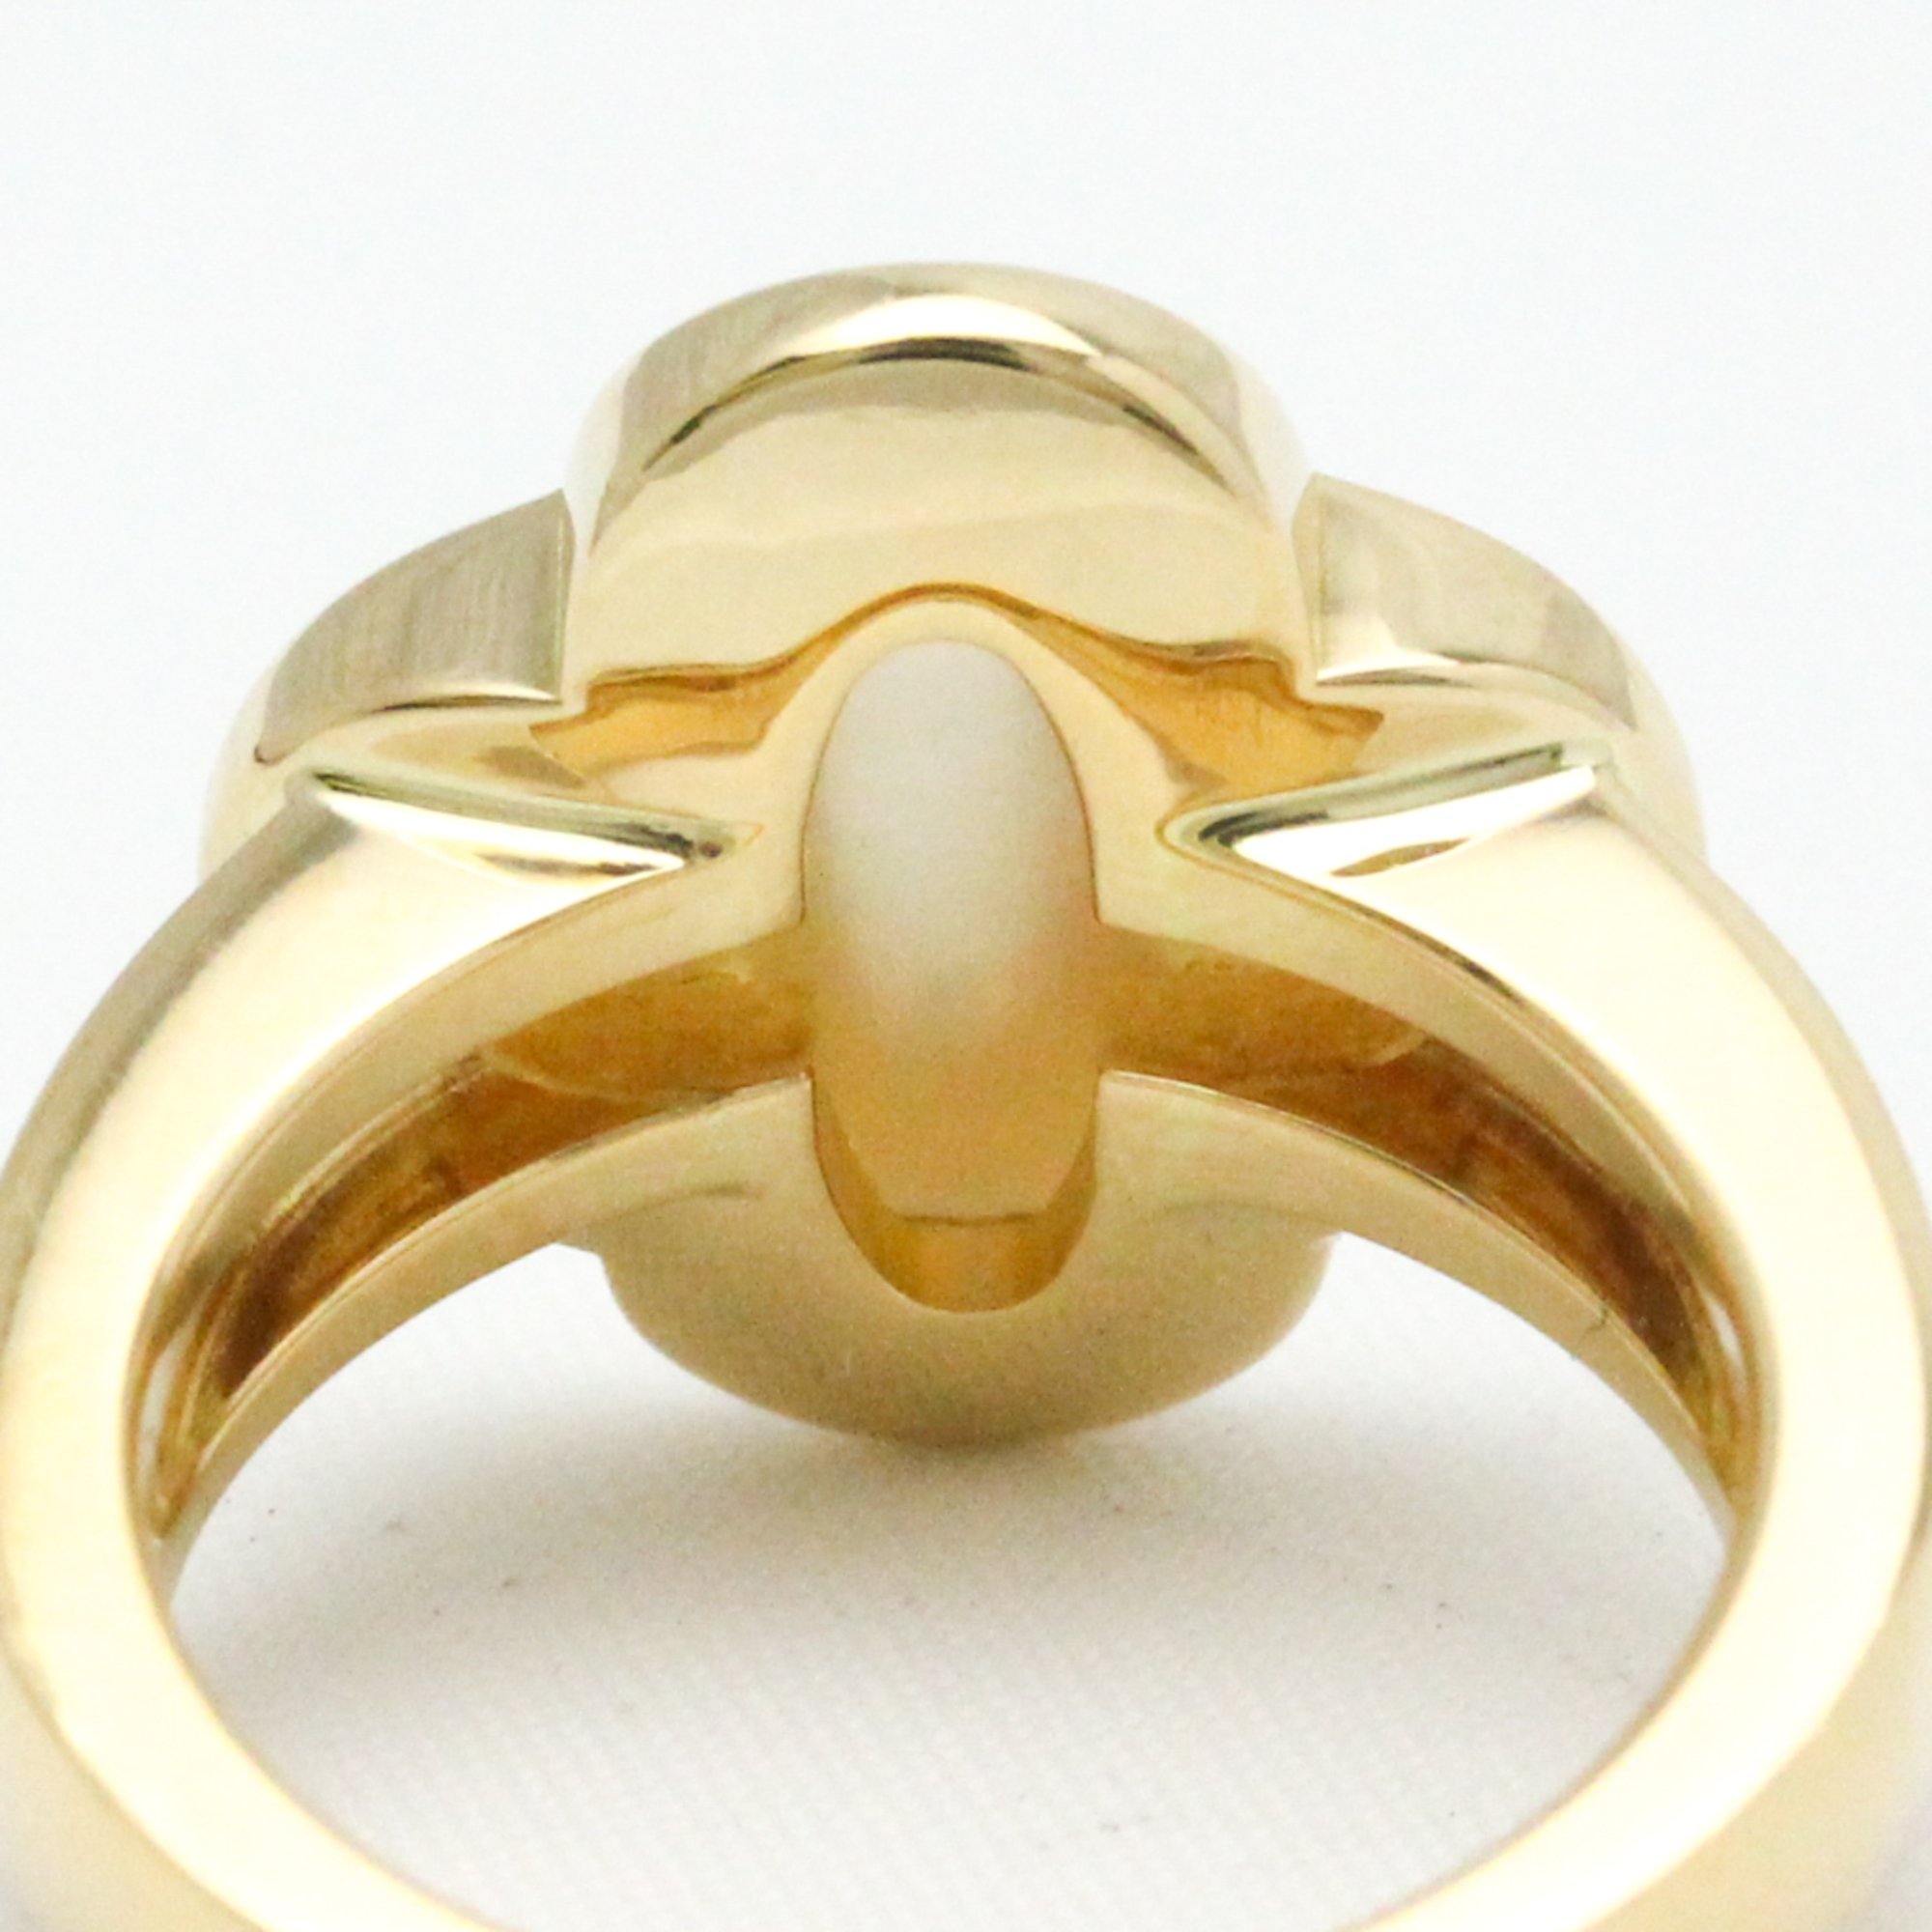 Van Cleef & Arpels Pure Alhambra Yellow Gold (18K) Fashion Shell Band Ring Gold